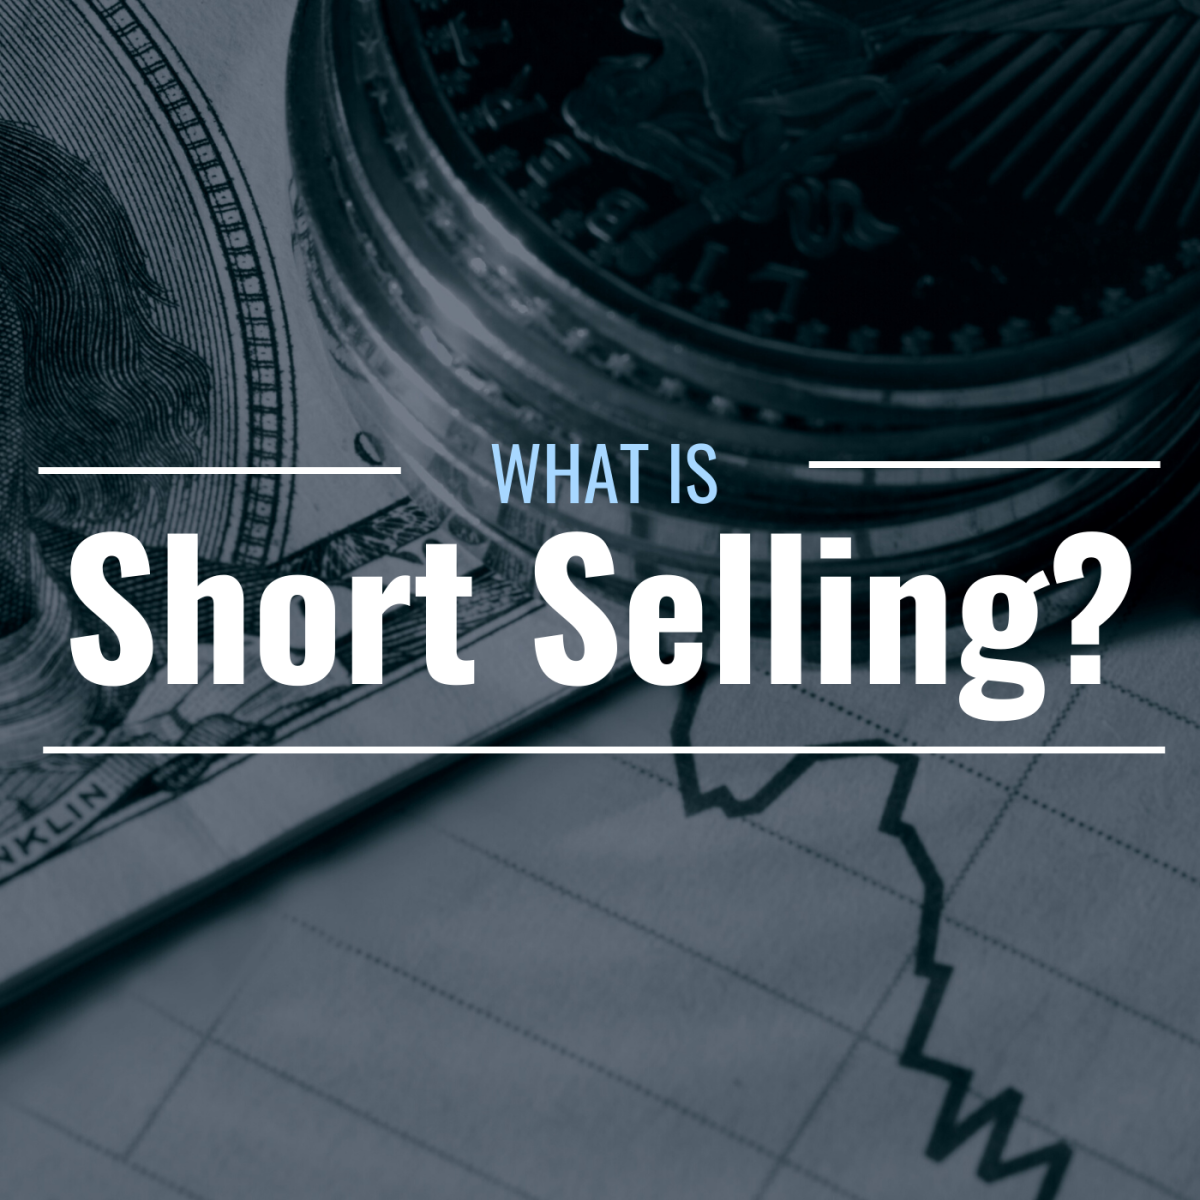 Image of money and a stock chart with text overlay: "What Is Short Selling?"